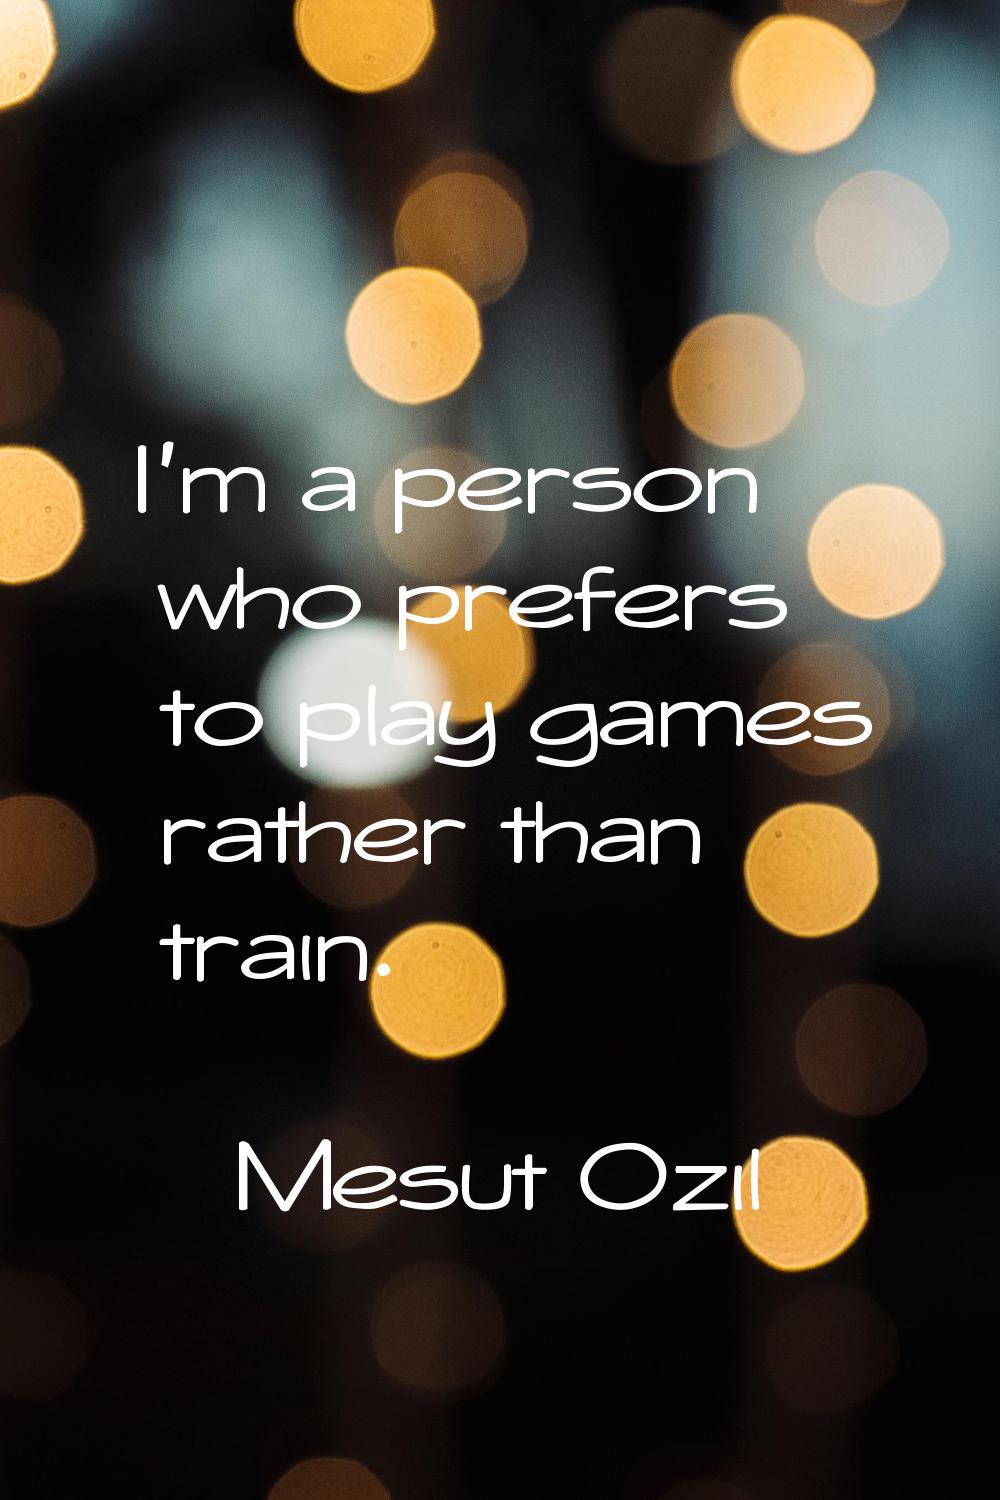 I'm a person who prefers to play games rather than train.